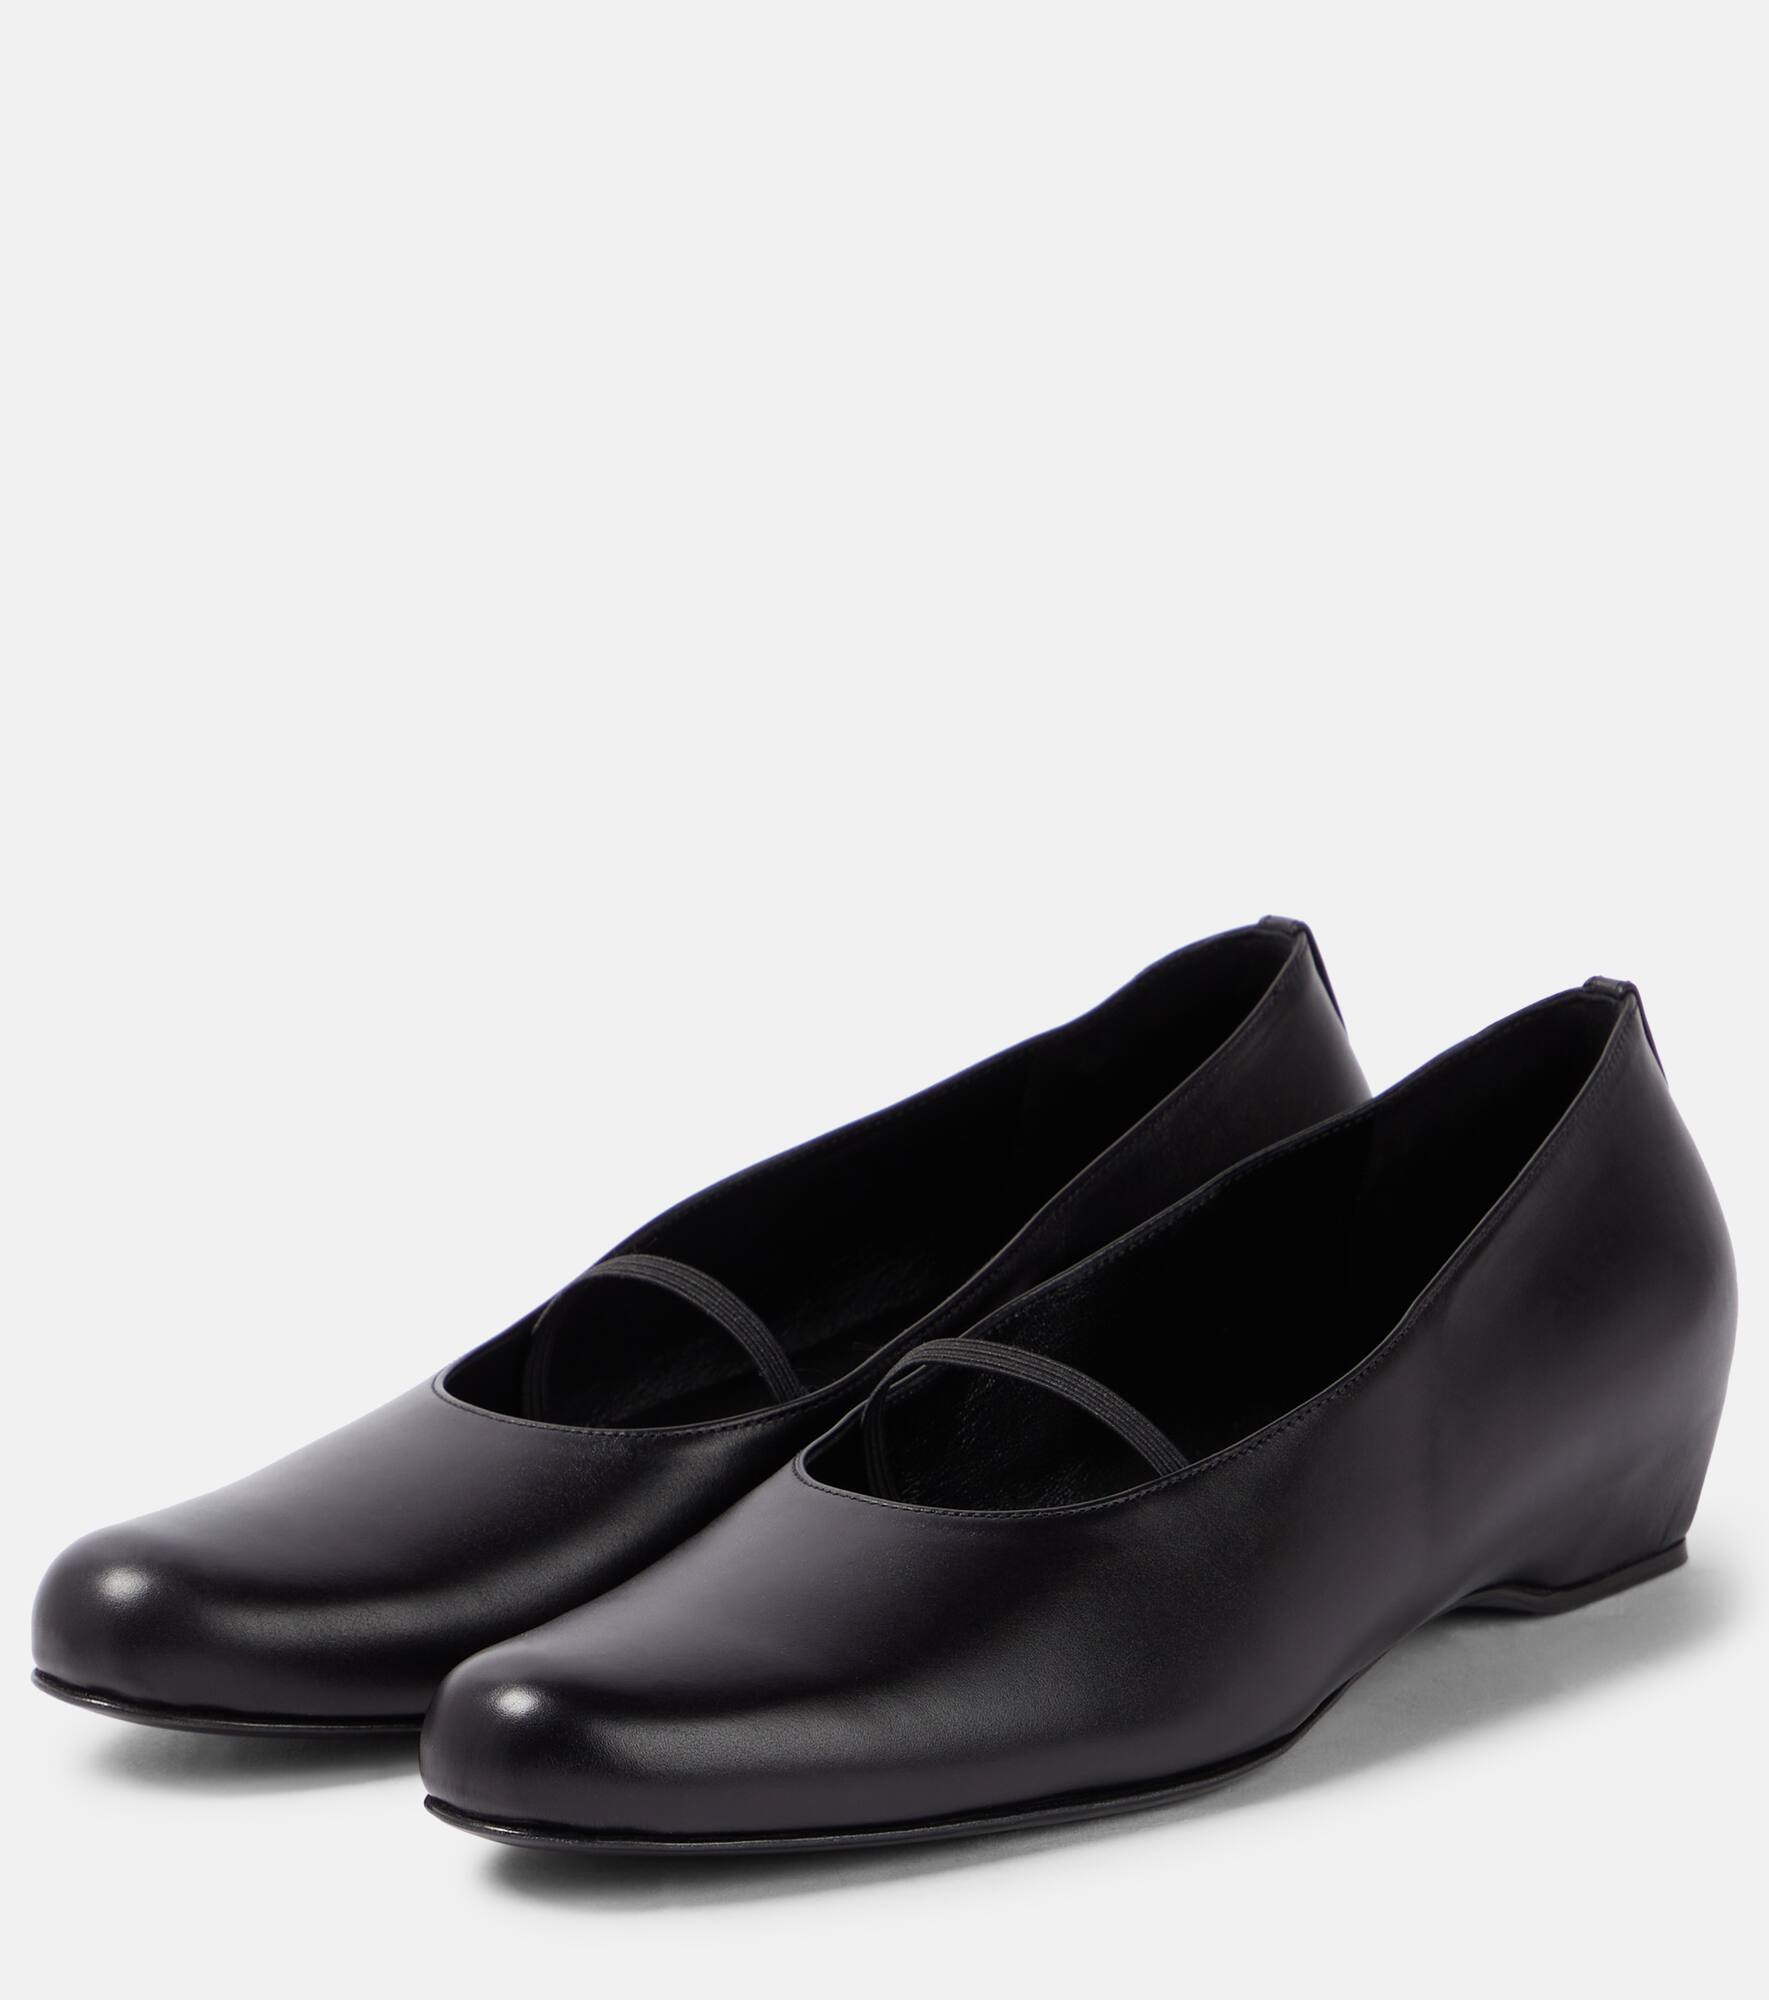 Marion leather ballet flats - 5